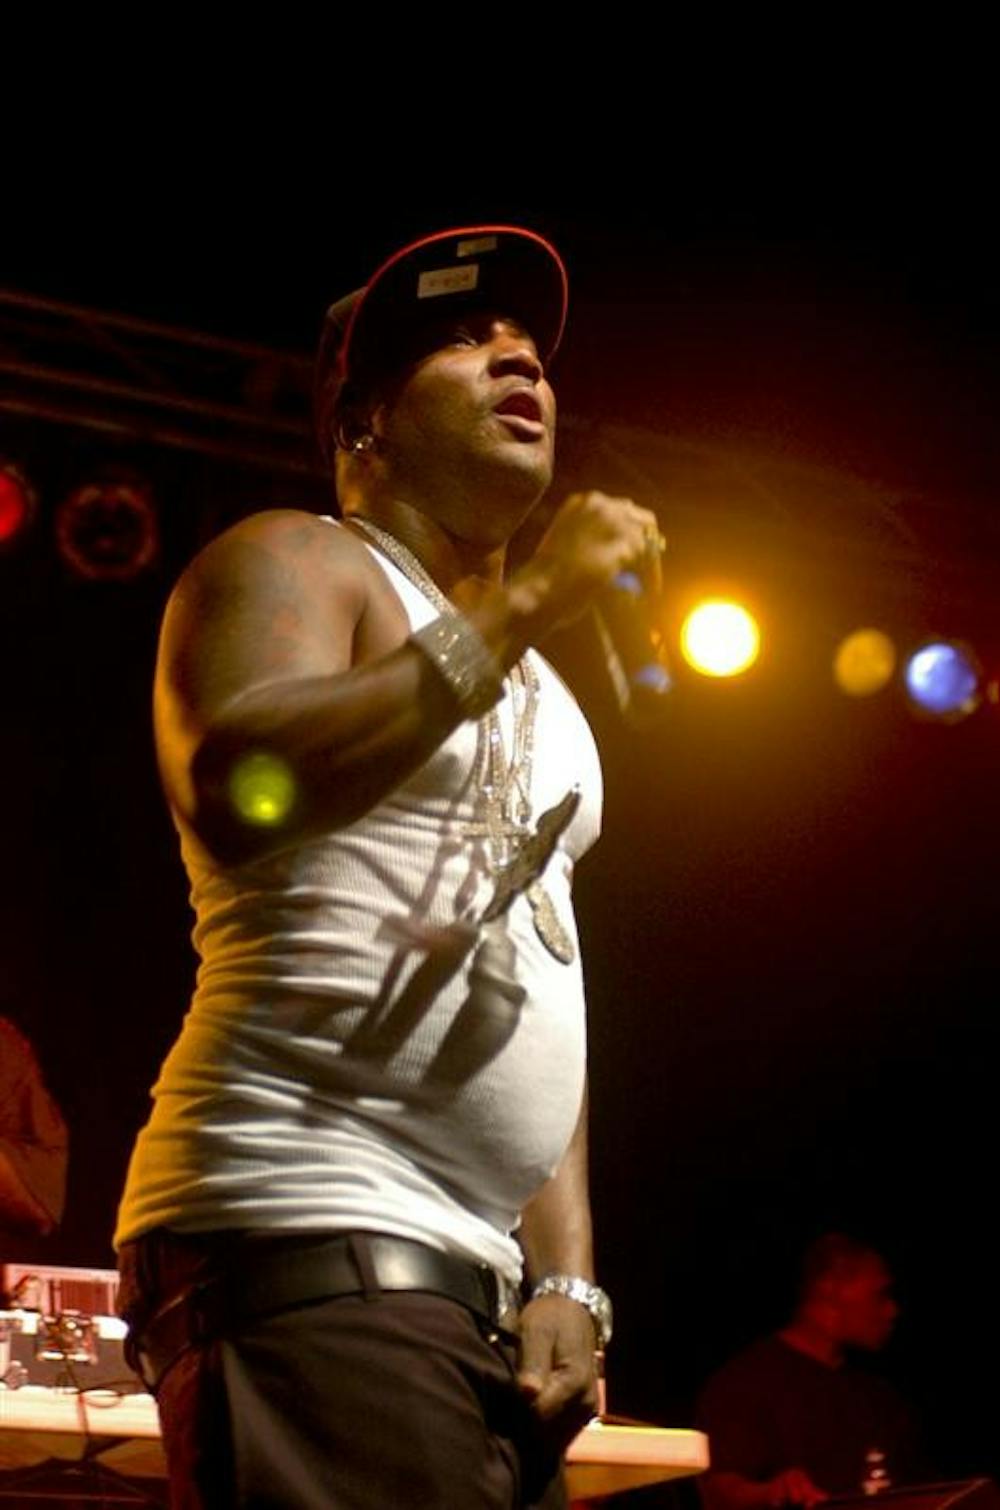 Young Jeezy performs Friday evening in the parking lot of Sigma Alpha Mu, part of the entertainment events for the Little 500 weekend. The concert was presented and produced by seniors Jonathan Wolf and Daniel Kuniansky of Blue Ocean Productions and seniors Jehad Bittar and Zack Kranz of Revival Entertainment.